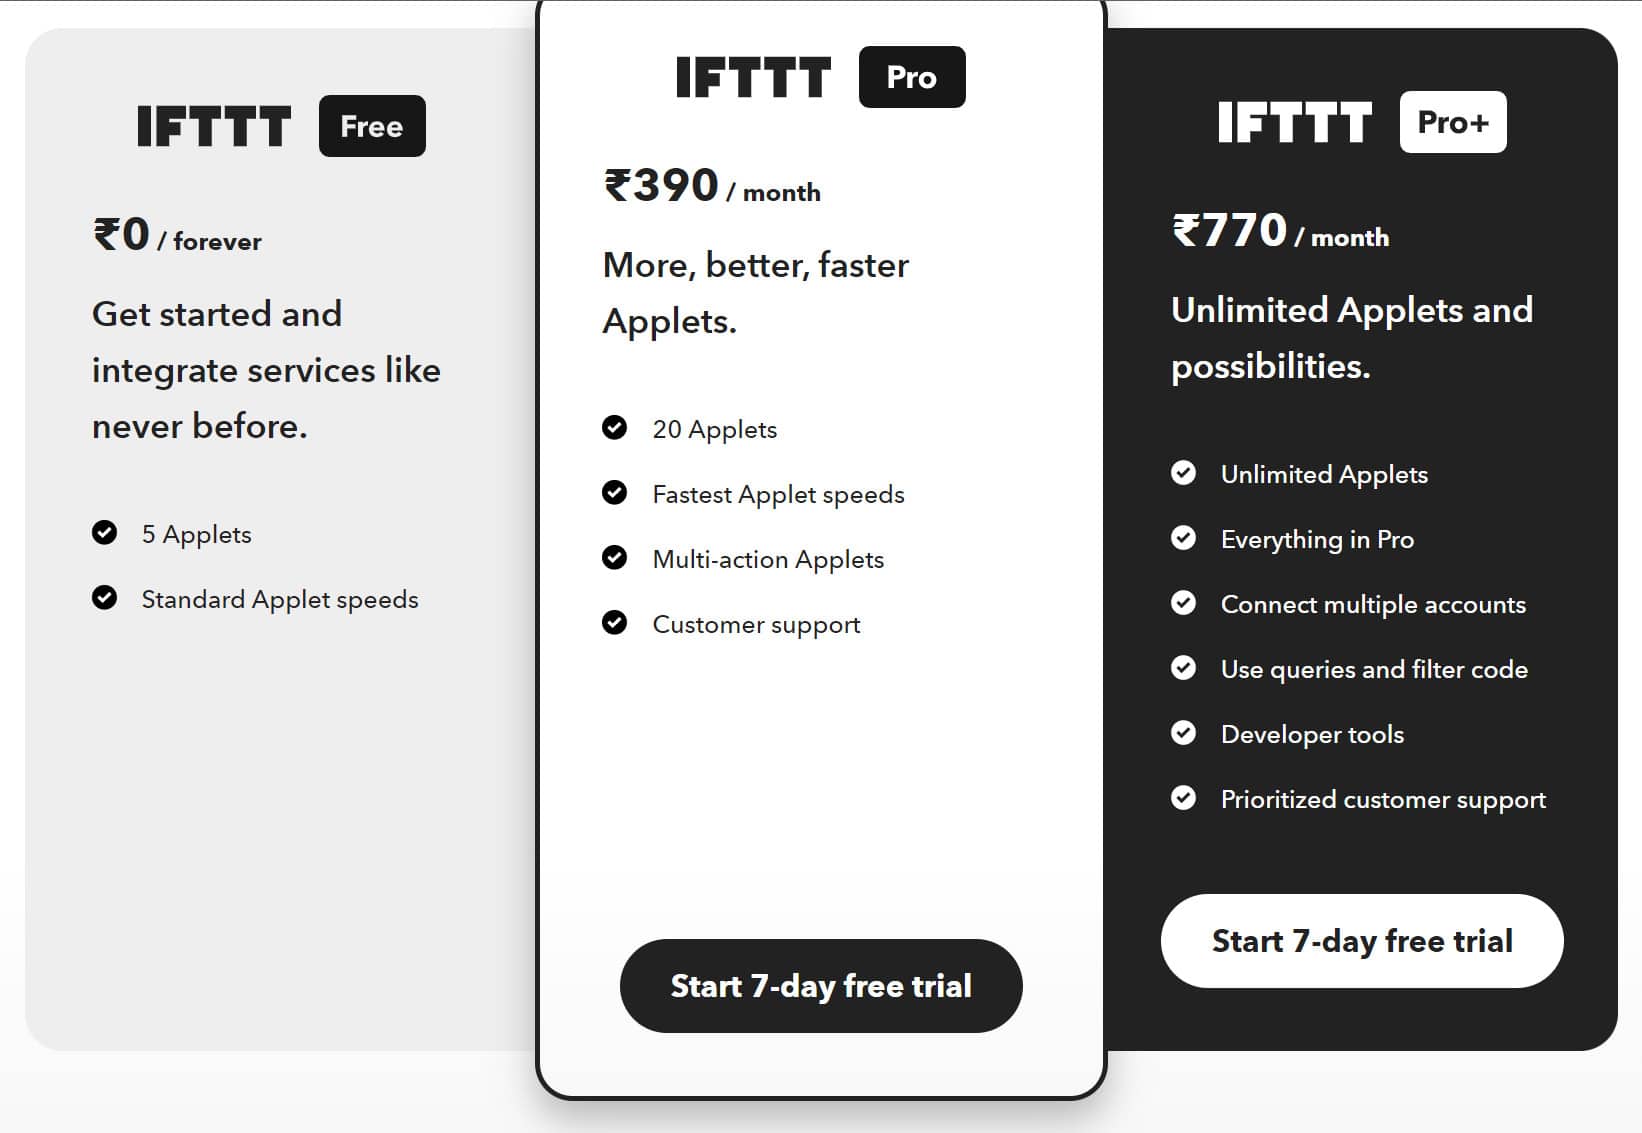 IFTTT - one of the famous social media automation tools